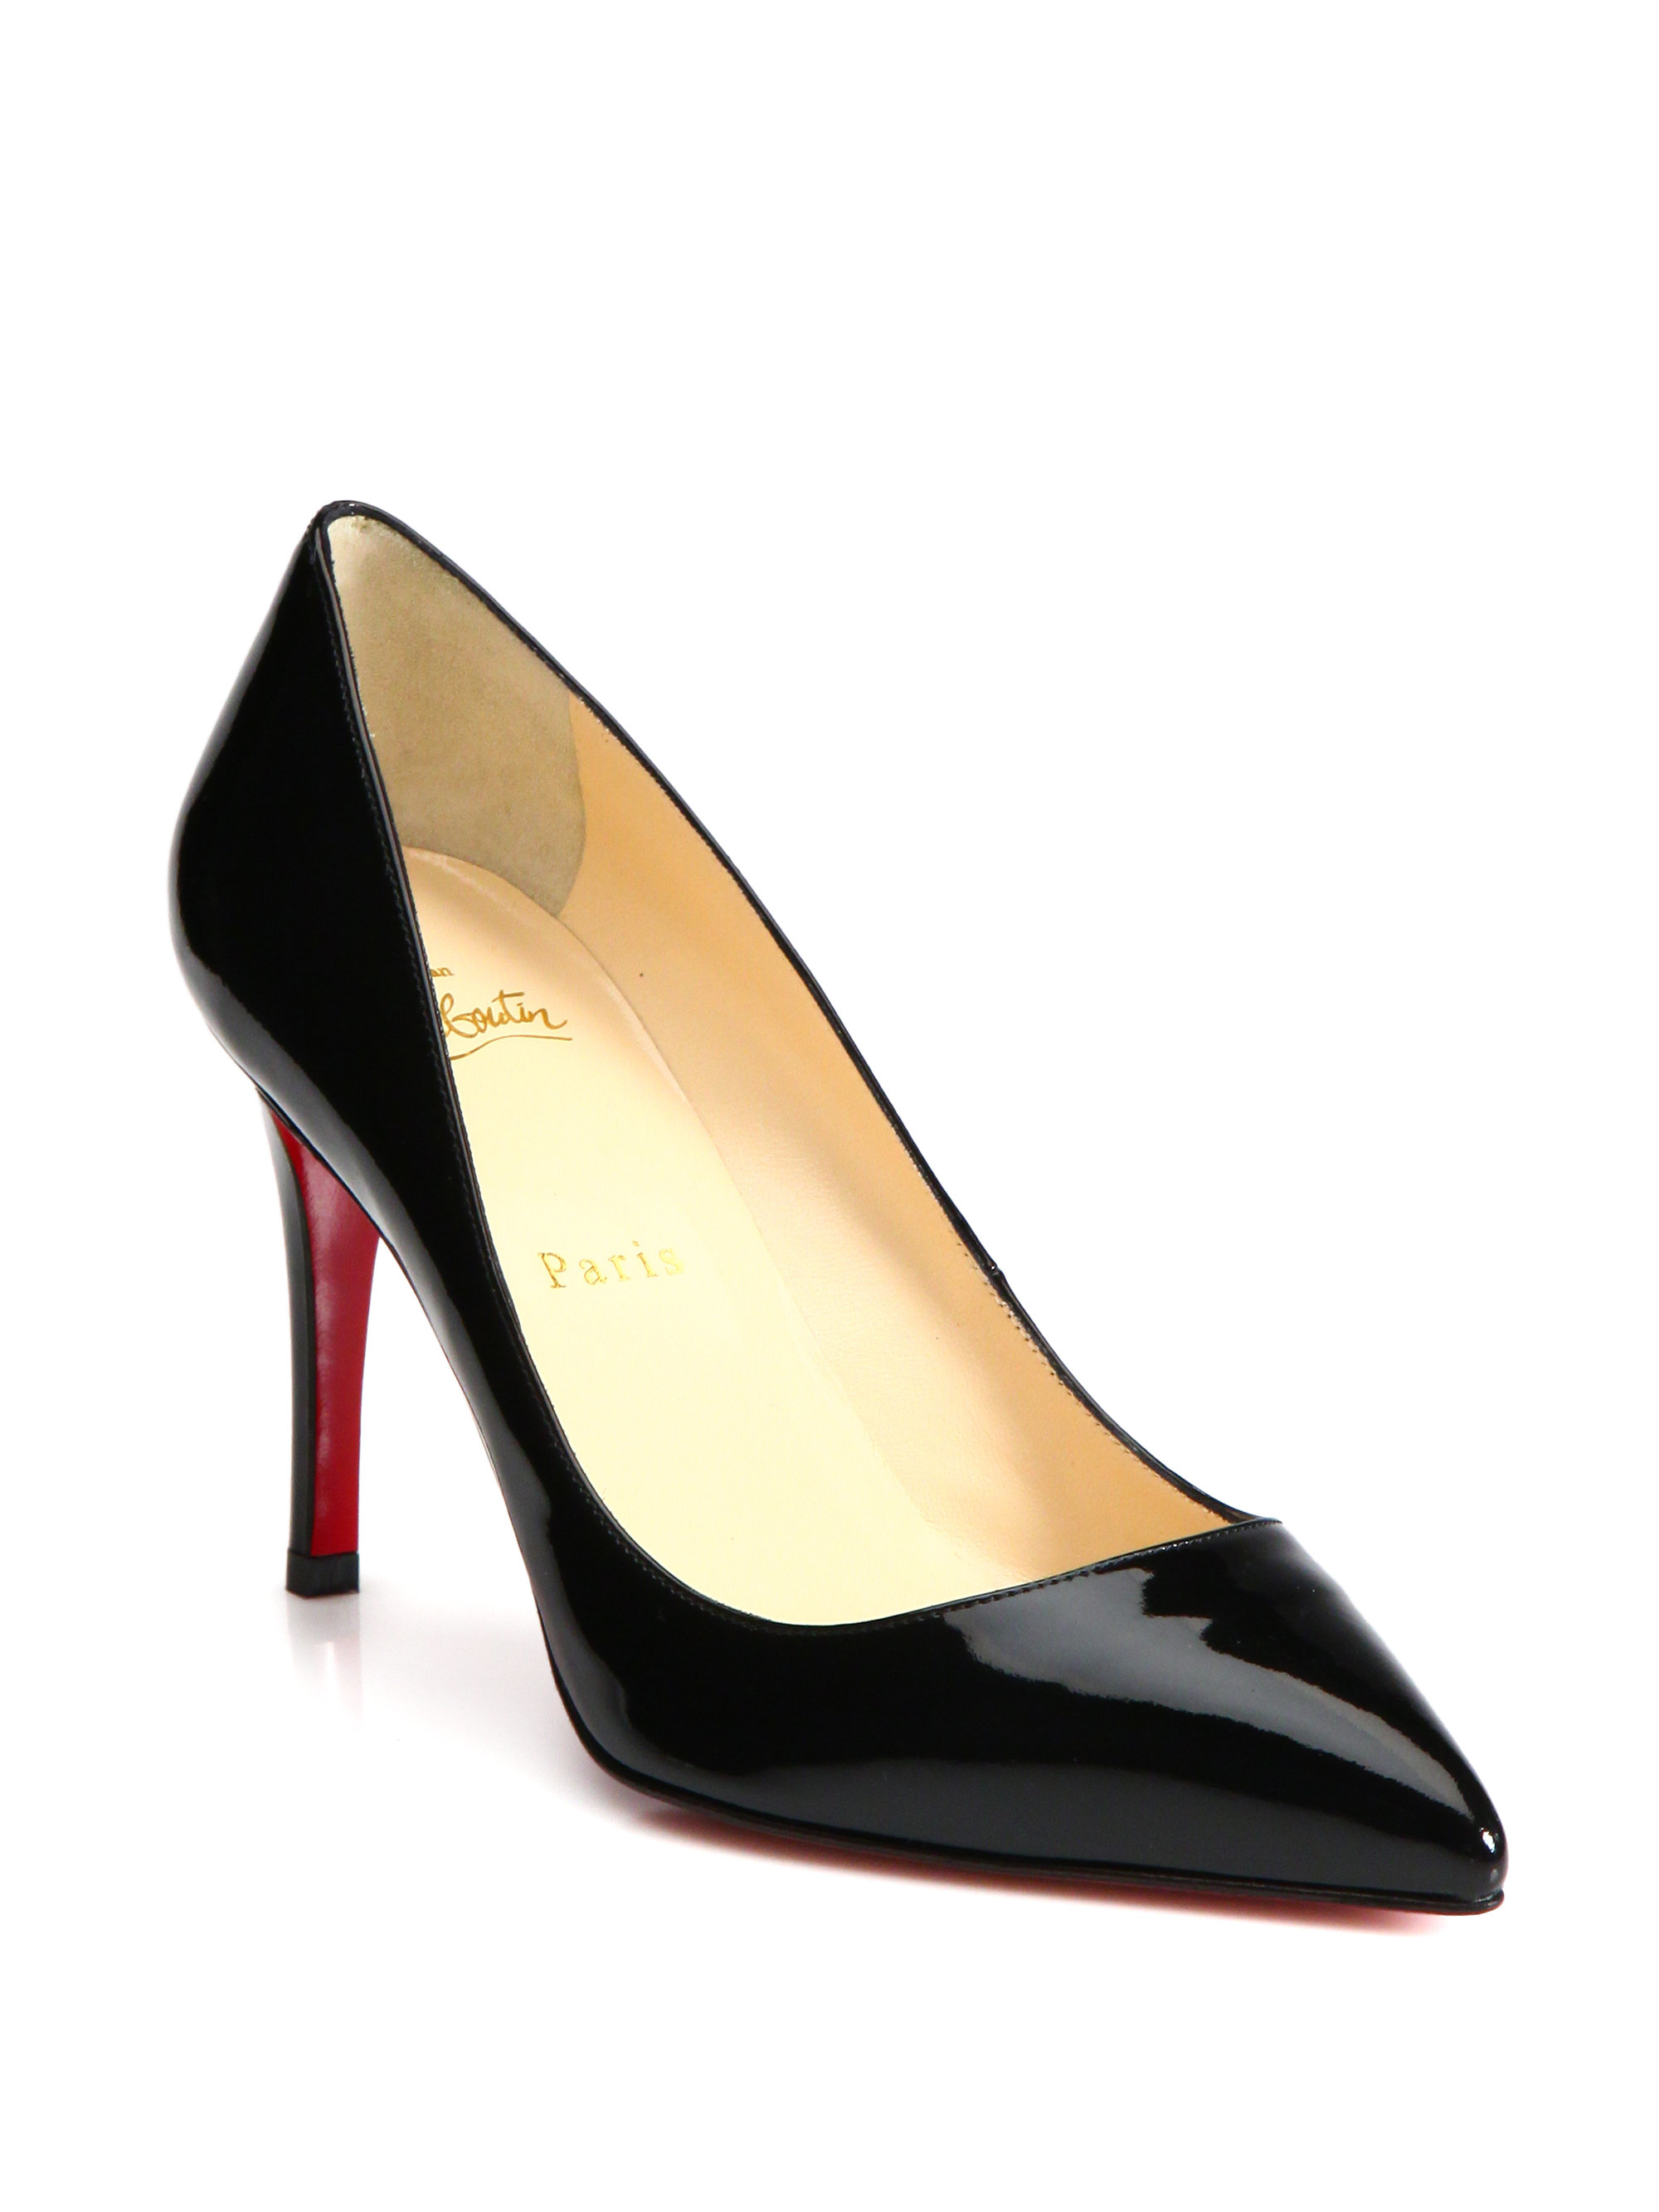 Christian louboutin Pigalle Patent Leather Pumps in Black | Lyst